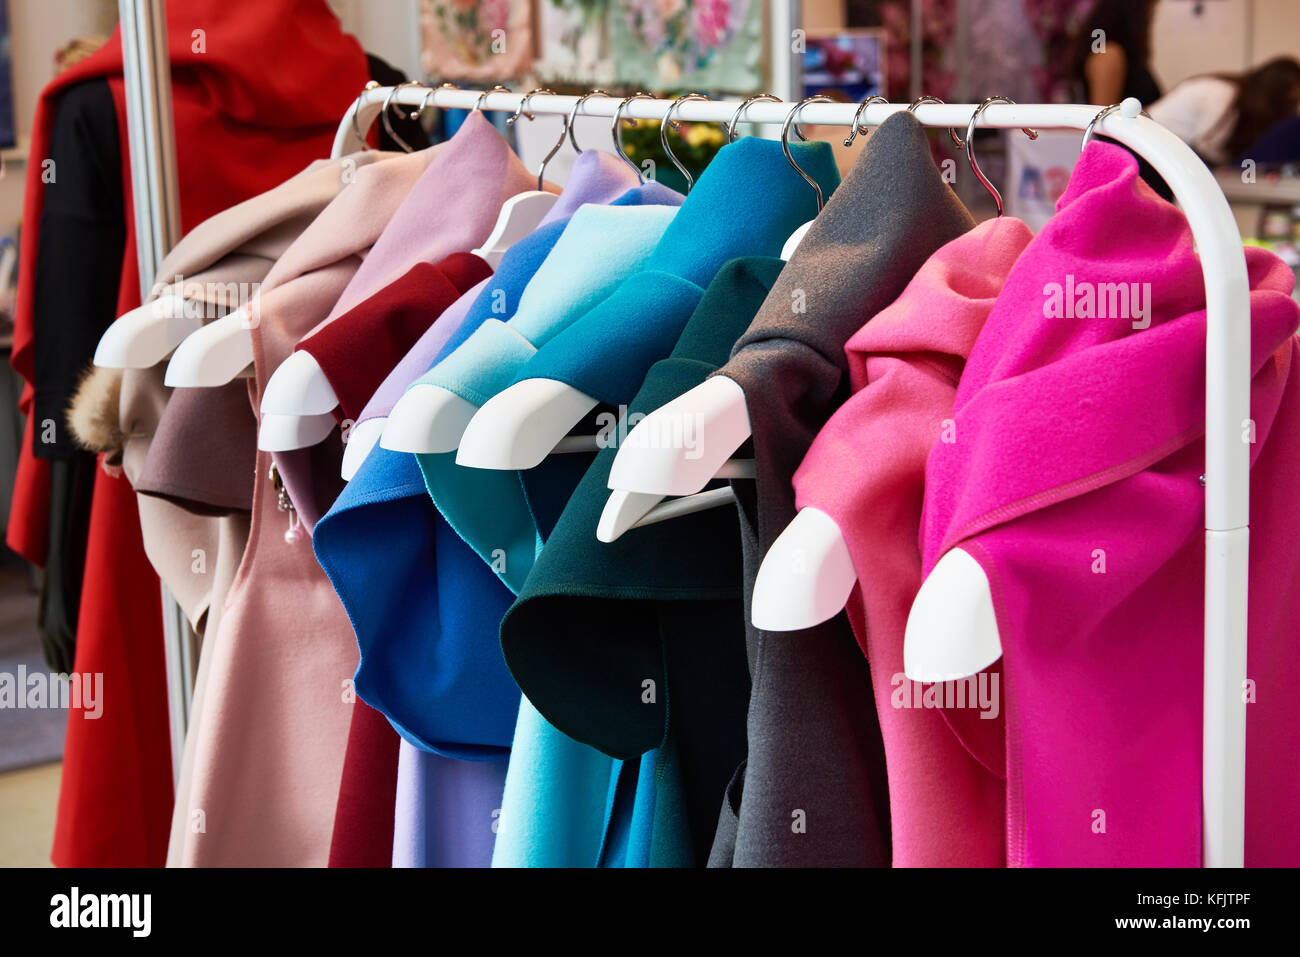 Cashmere colored fabrics like dresses on hangers in the store Stock Photo